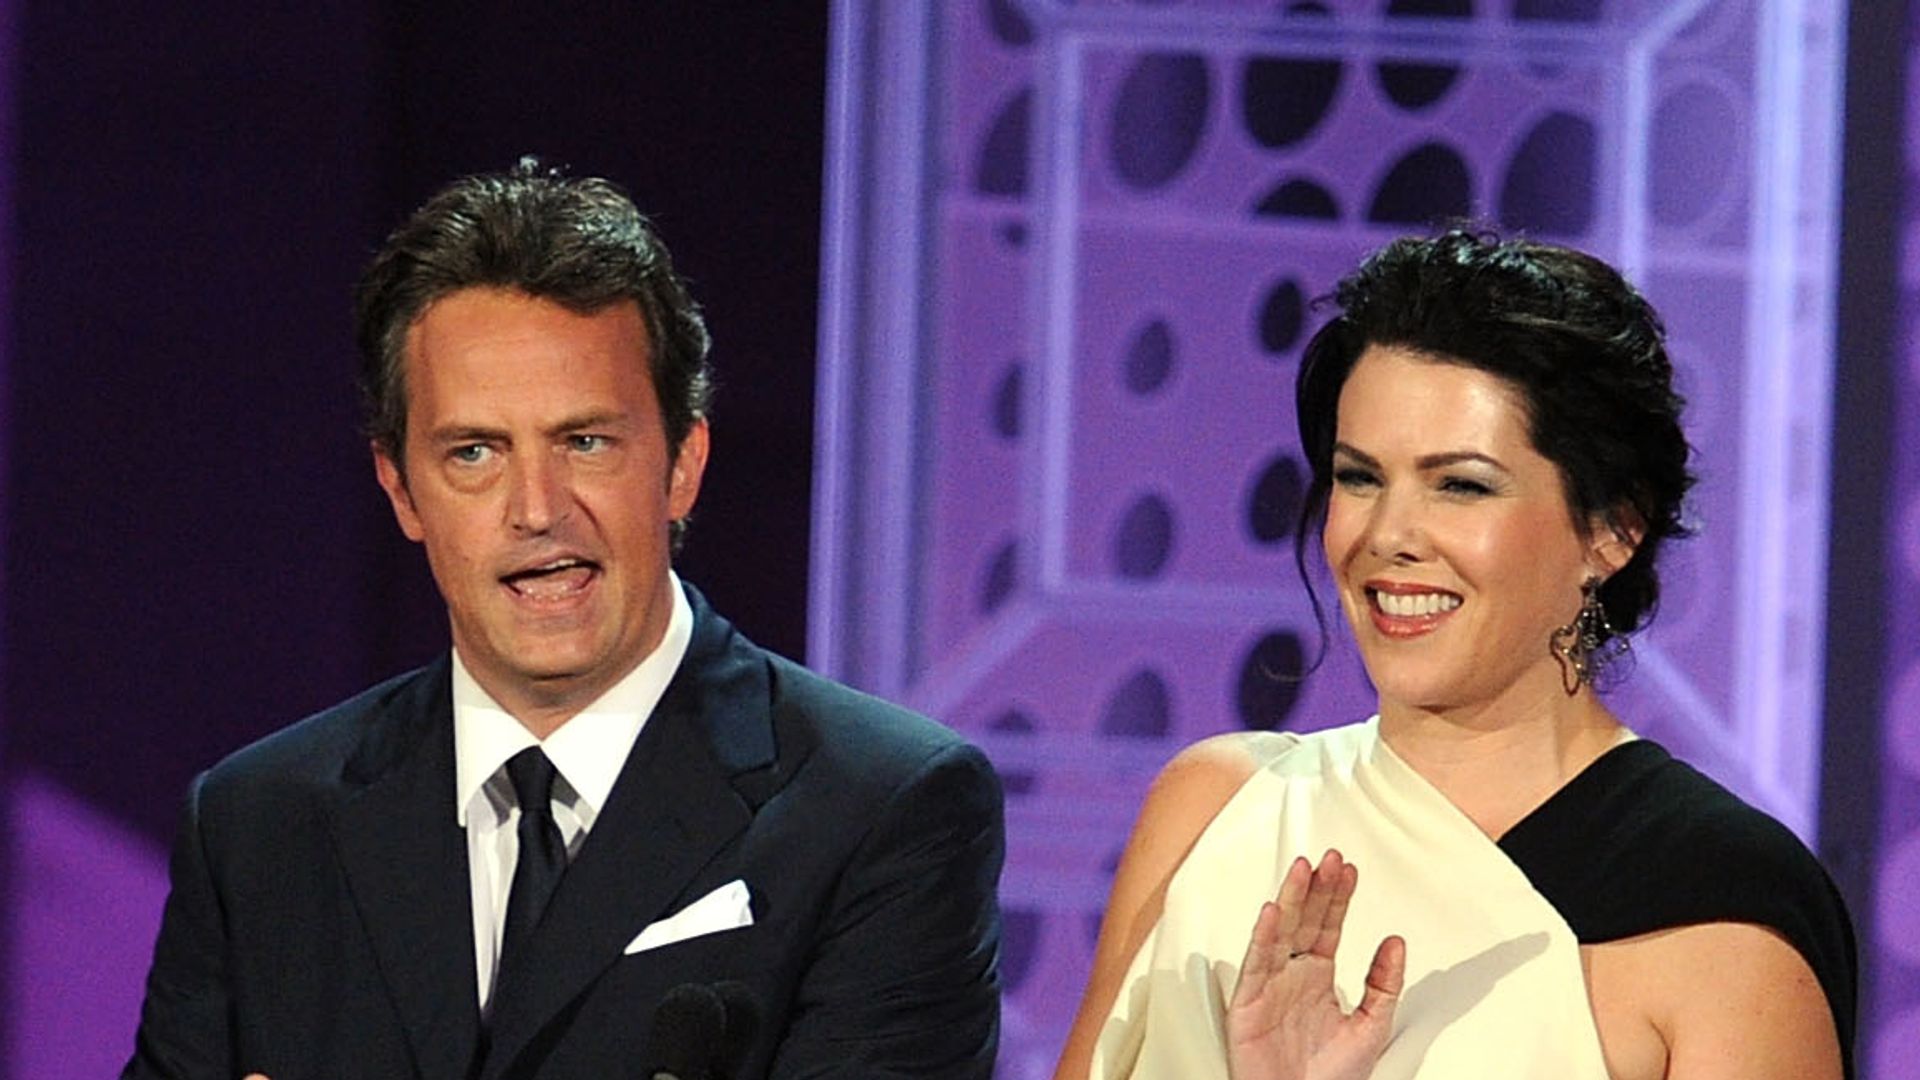 LOS ANGELES, CA - AUGUST 29:  Actors Matthew Perry (L) and Lauren Graham present the Guest Actress & Actor In A Comedy Series awards onstage at the 62nd Annual Primetime Emmy Awards held at the Nokia Theatre L.A. Live on August 29, 2010 in Los Angeles, California.  (Photo by Kevin Winter/Getty Images)